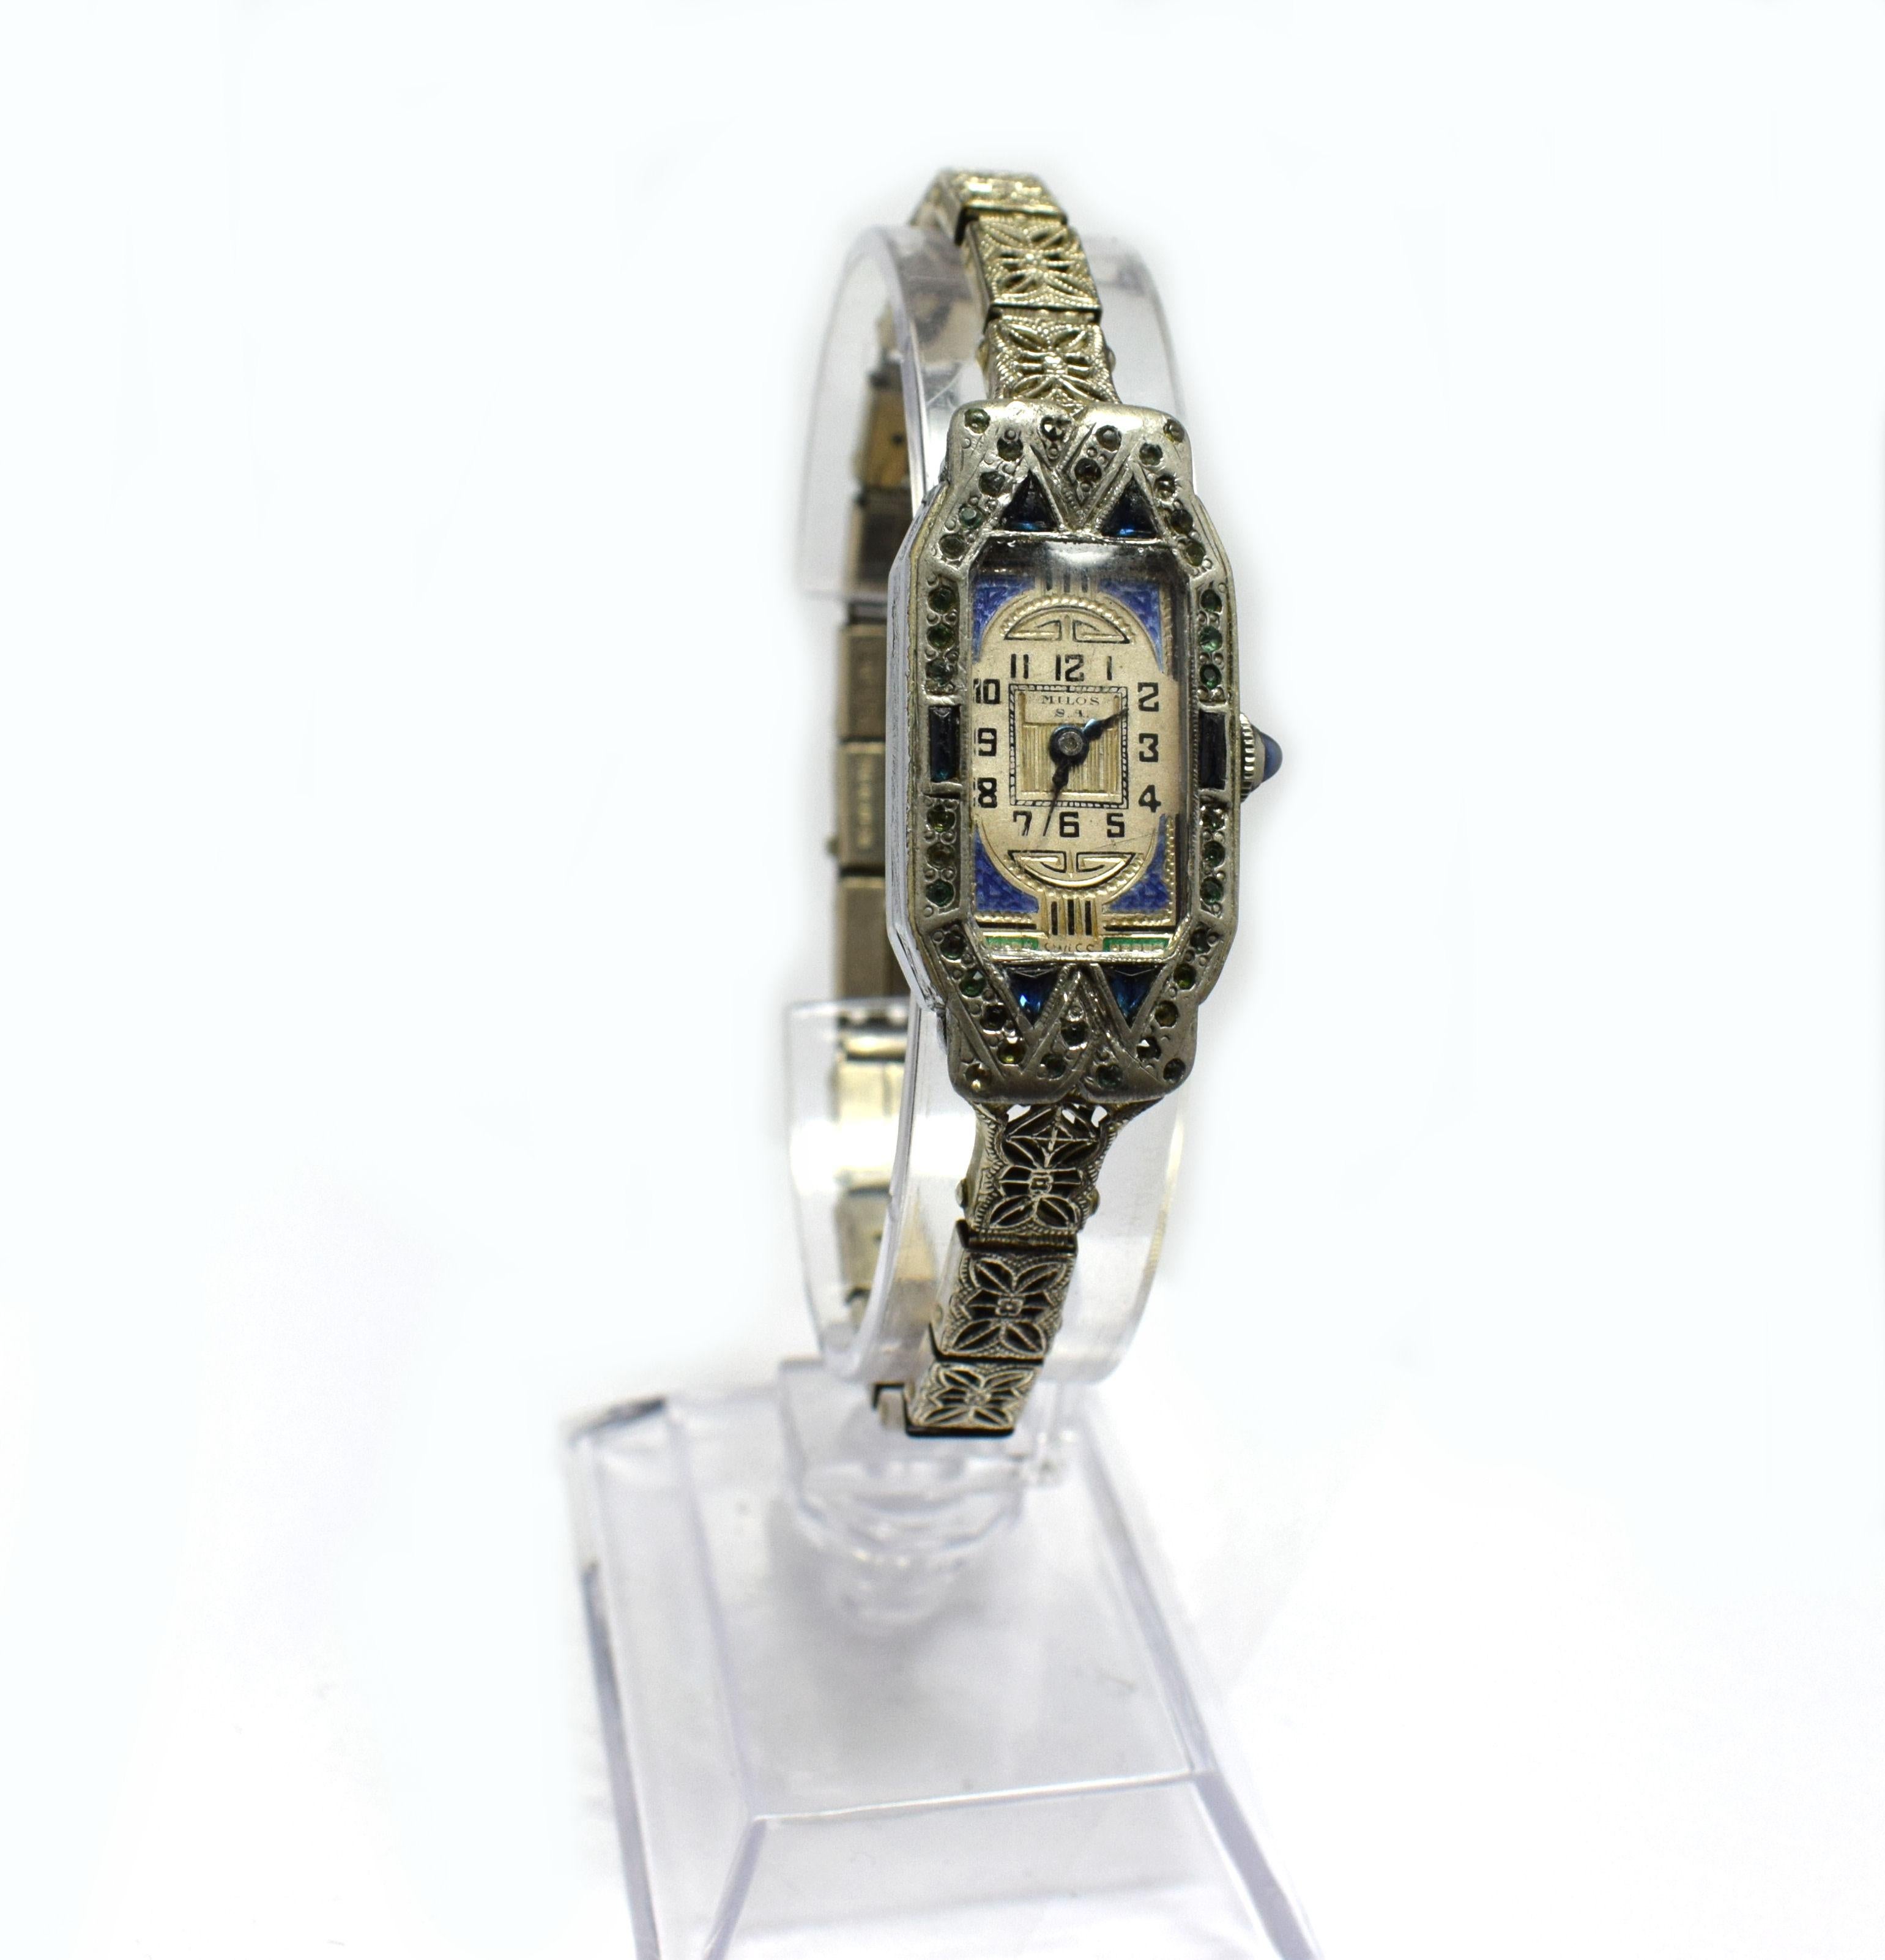 1930s Art Deco Ladies Sapphire Marcasite Enamel Watch with a Filigree Band 3